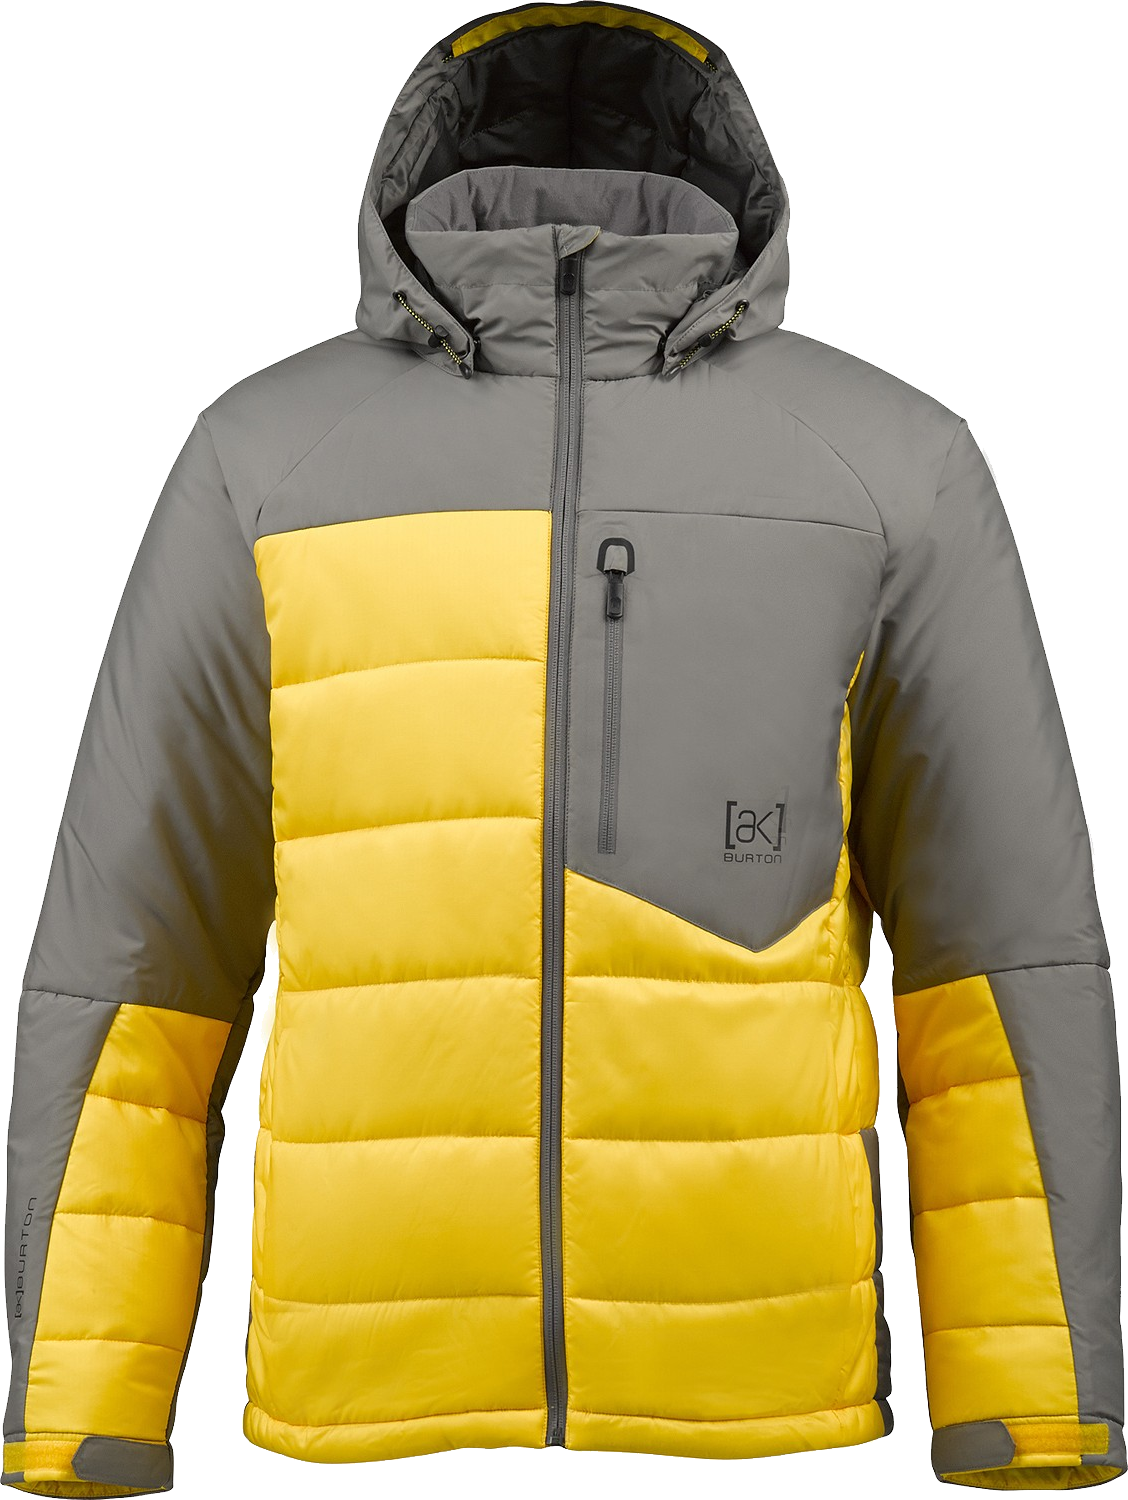 A Yellow And Grey Jacket